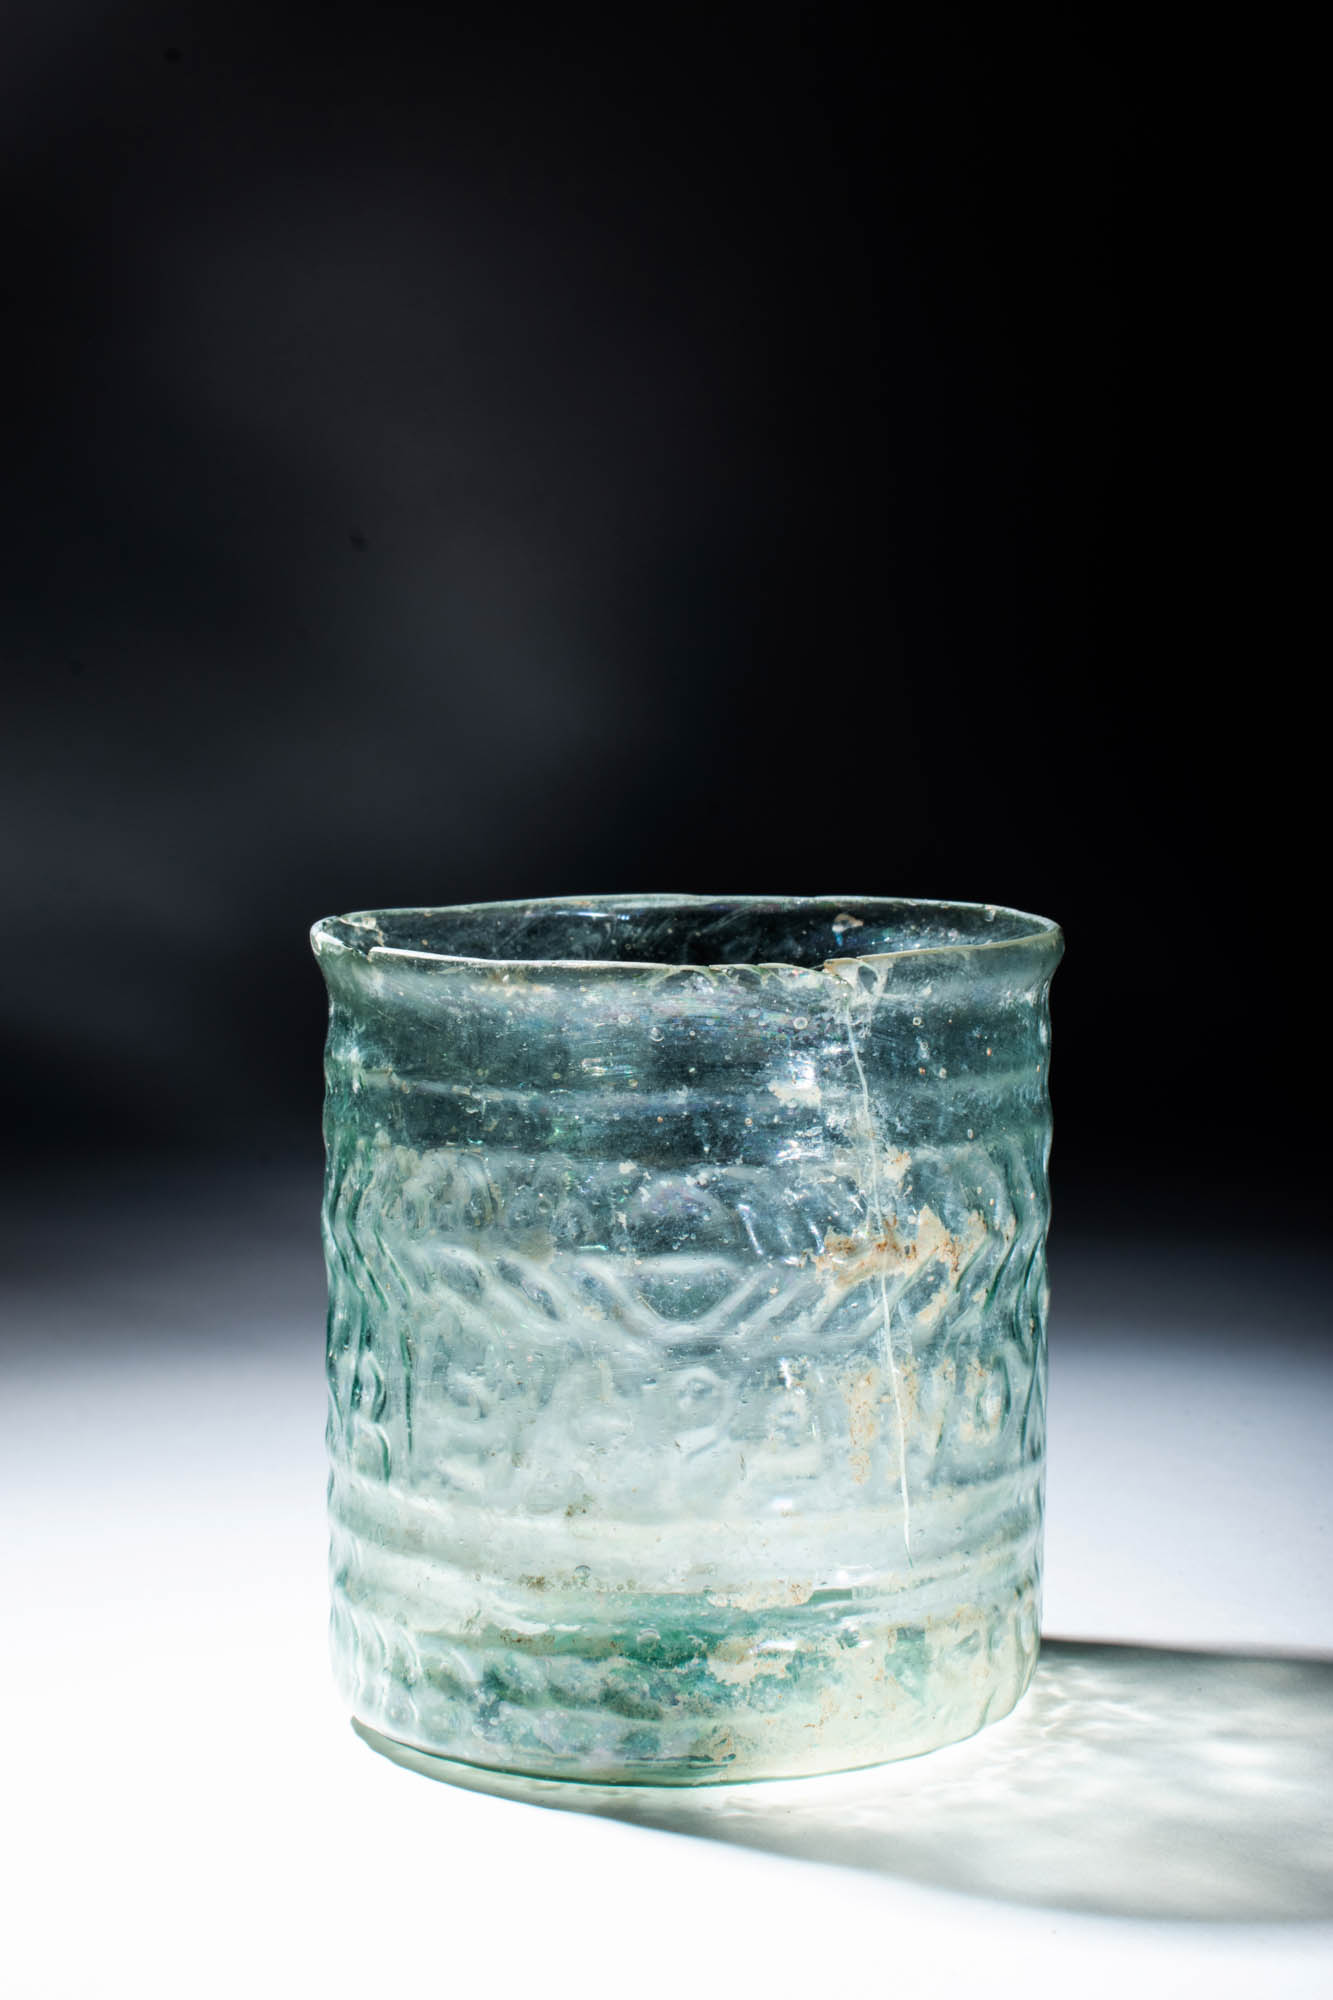 BYZANTINE GLASS CUP DECORATED WITH INSCRIPTION